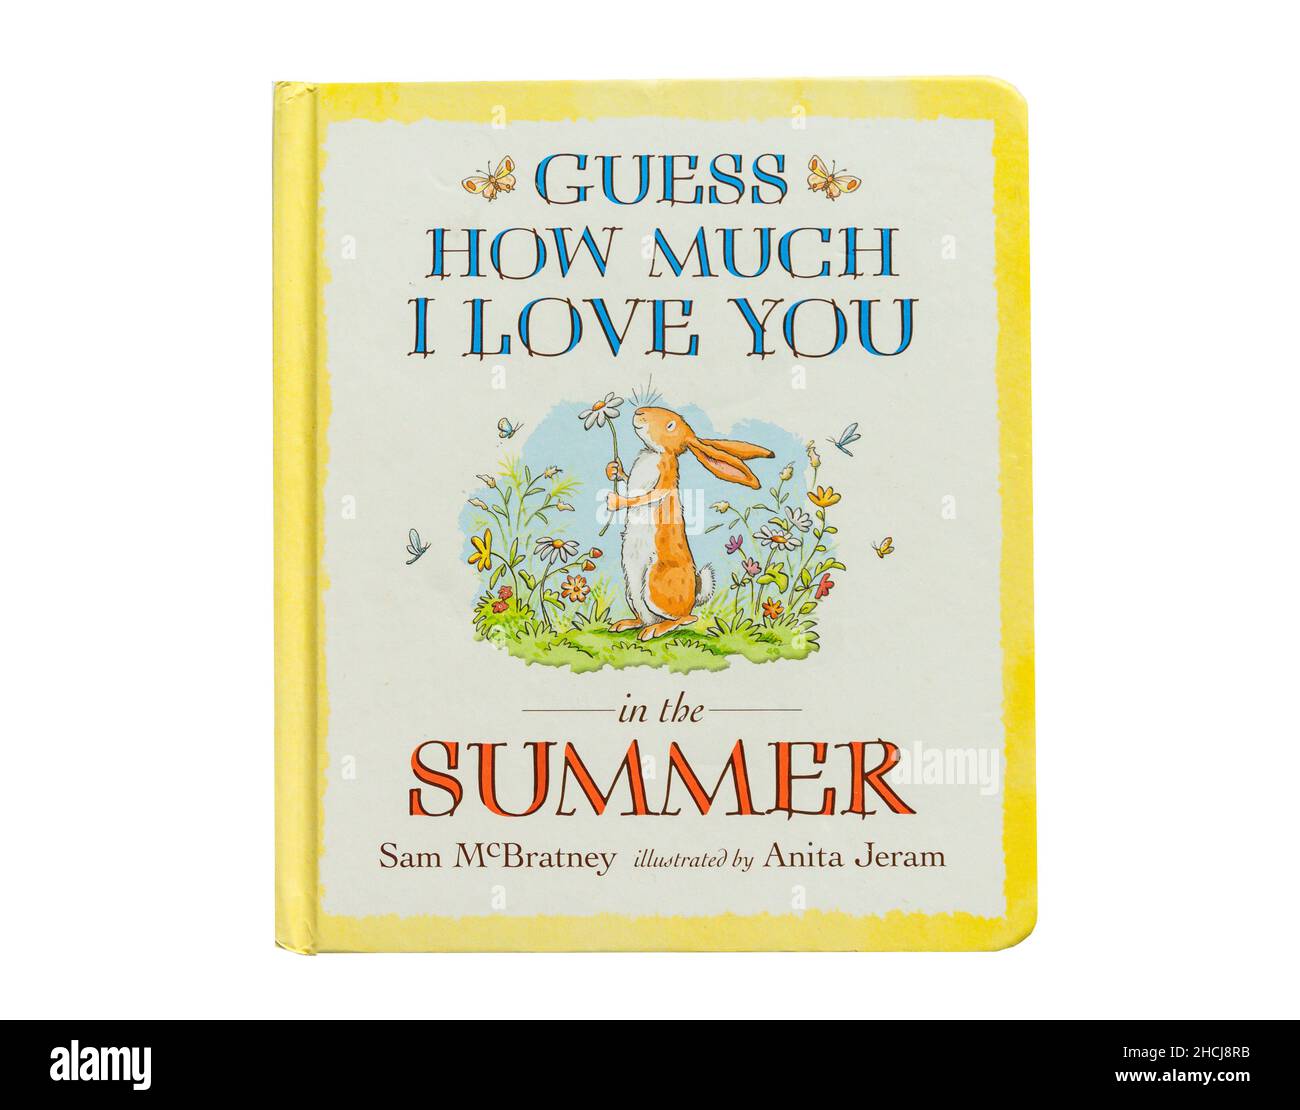 Guess How much I love you in the summer by Sam McBratney, Greater London, England, United Kingdom Stock Photo